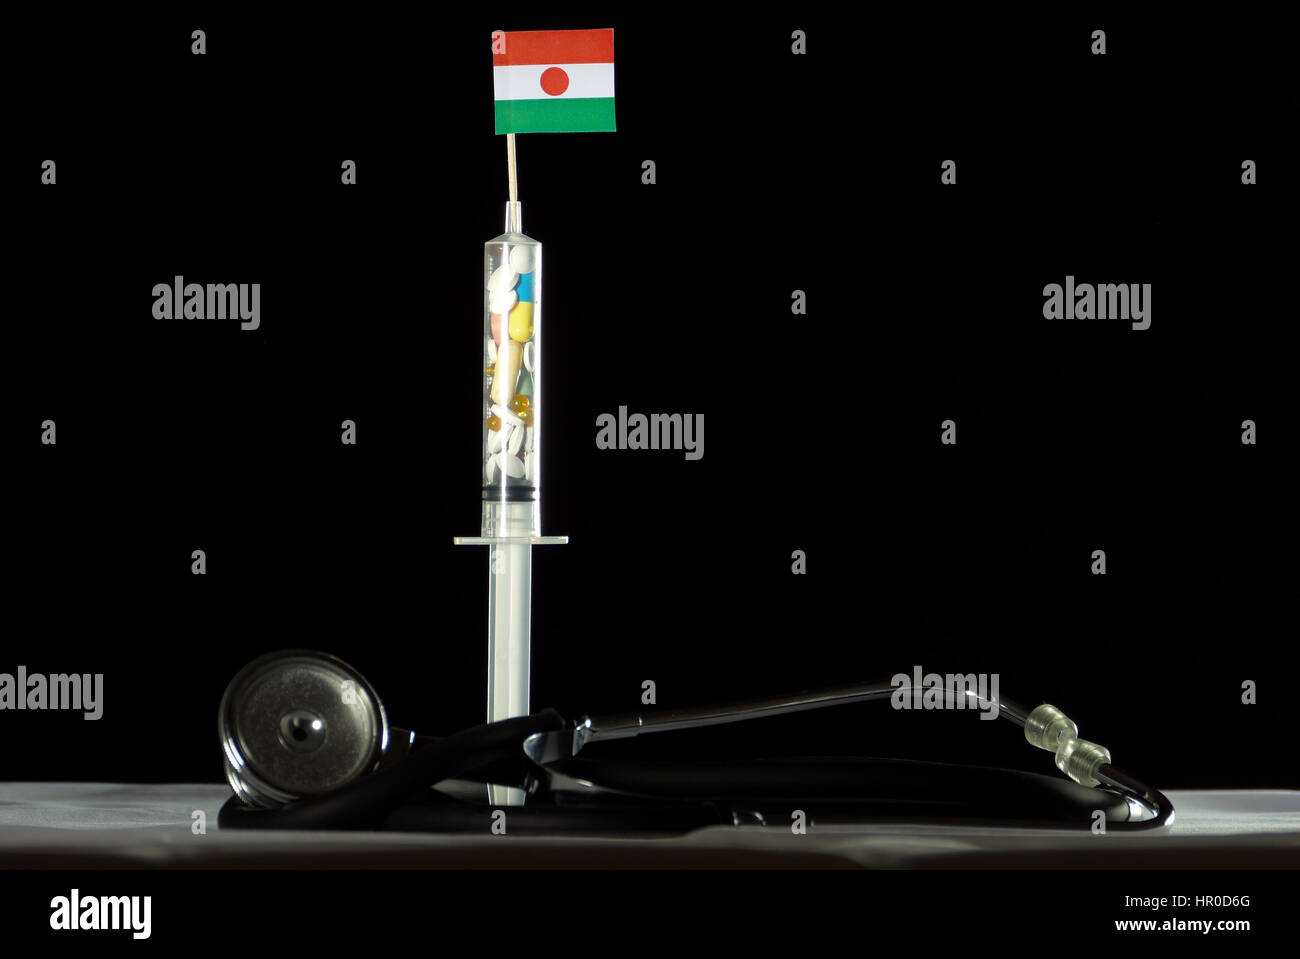 Stethoscope and syringe filled with drugs injecting the Nigerien flag on a black background Stock Photo